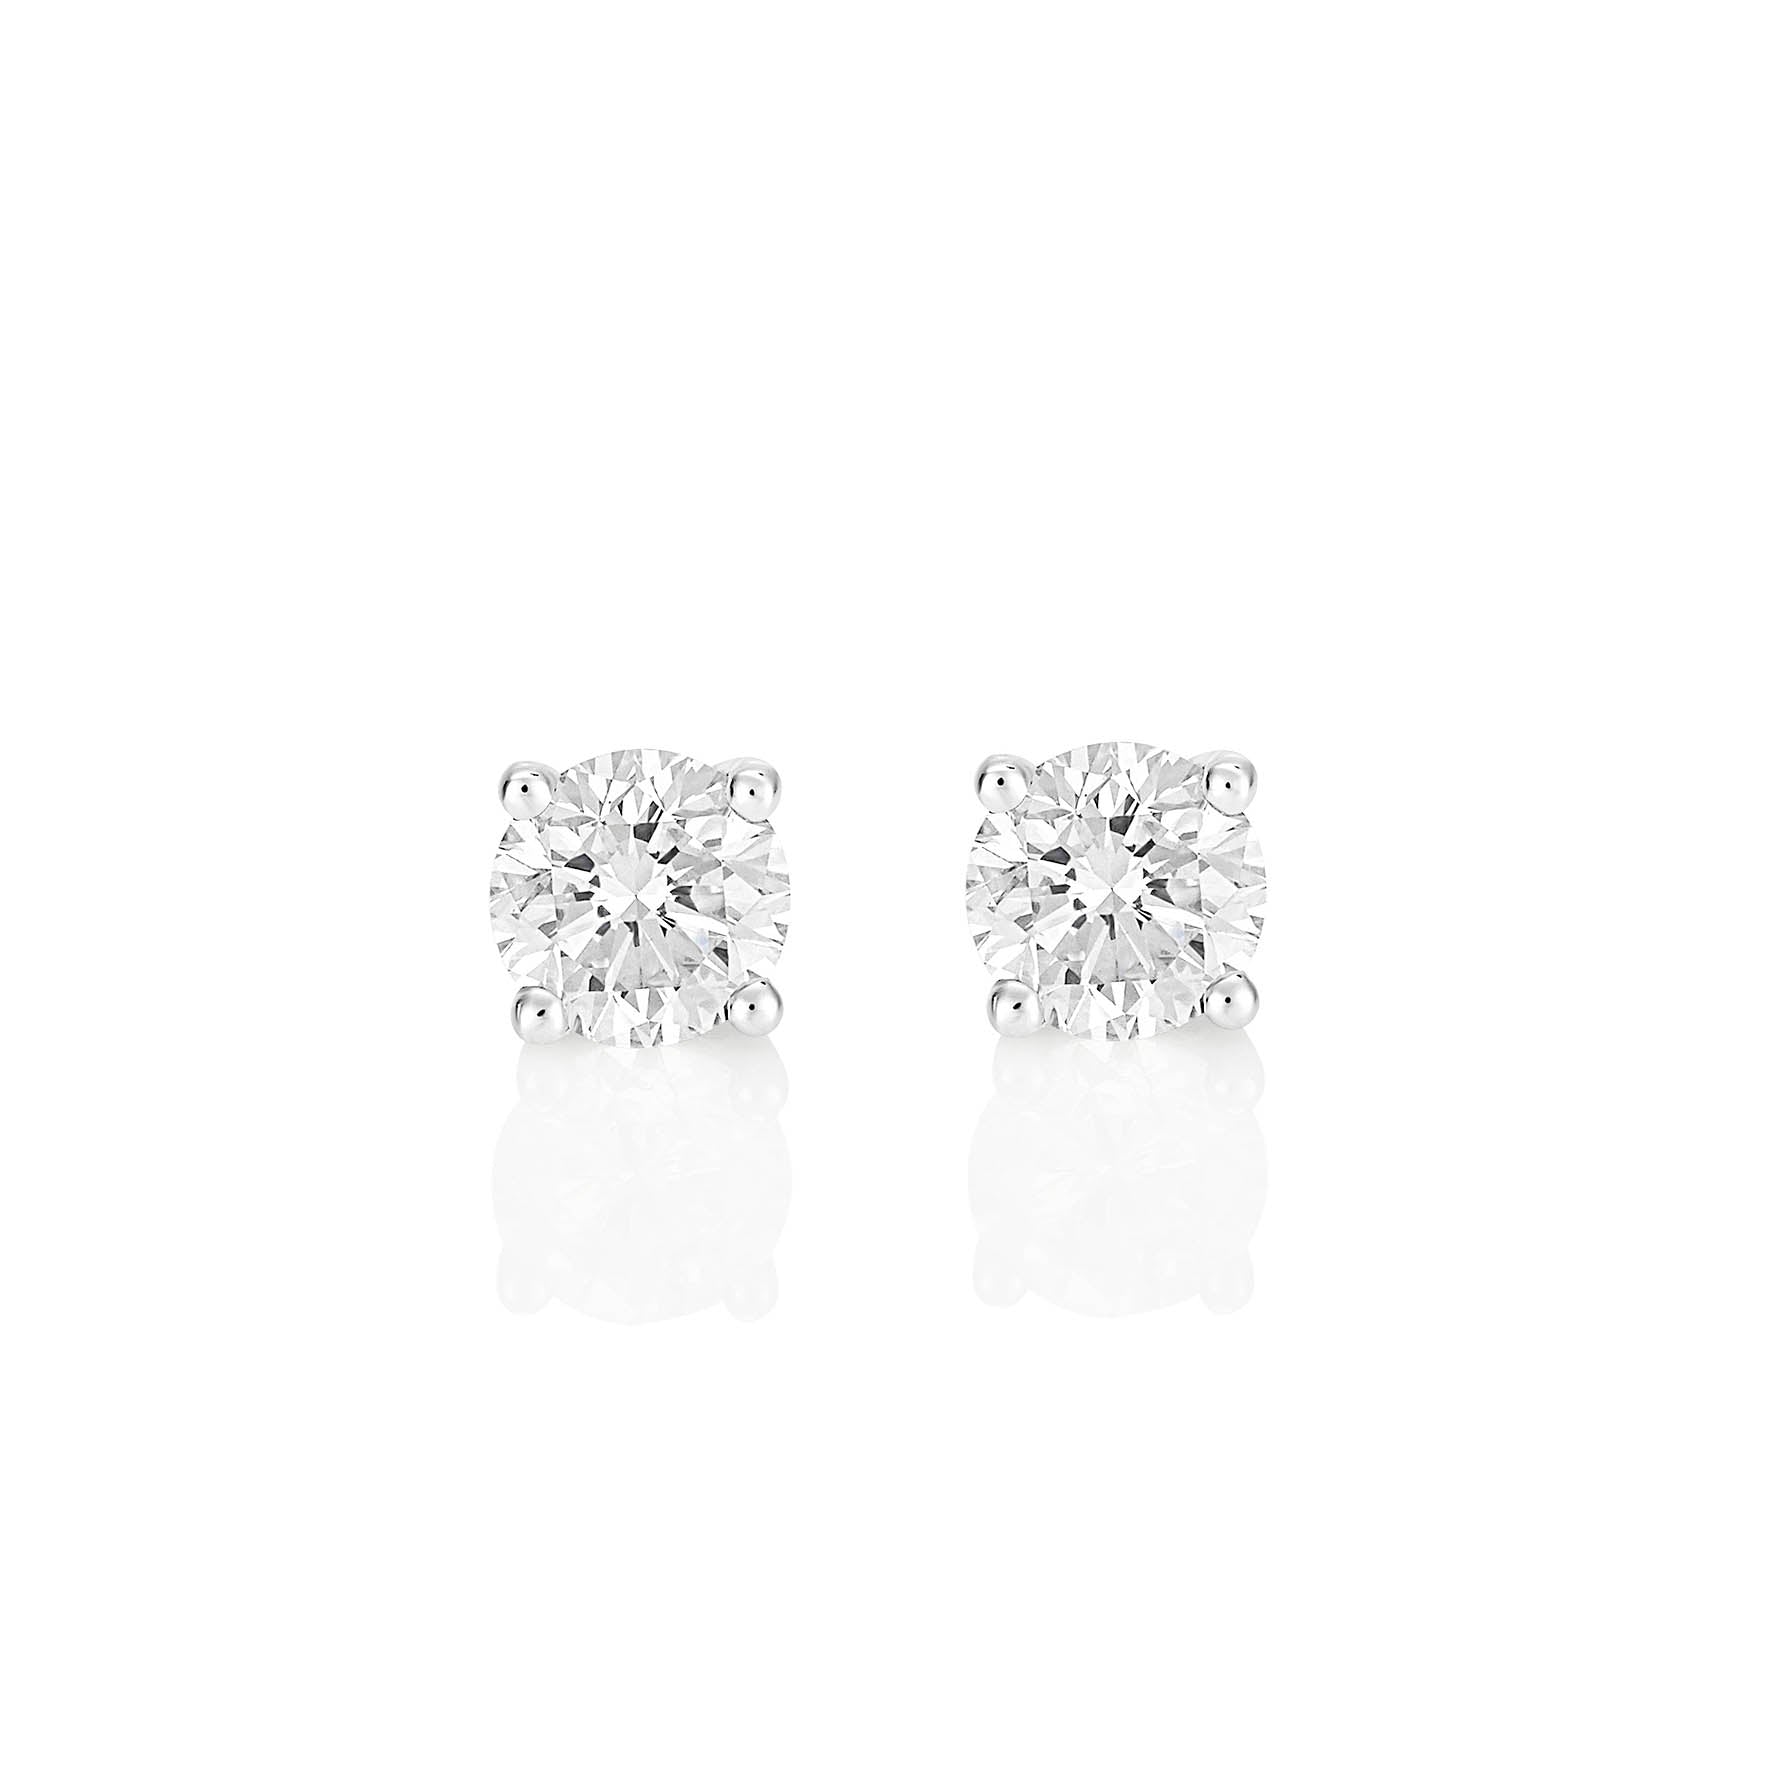 Palomino Solitaire Diamond Stud Earrings in 18 ct White Gold 1.00 ct